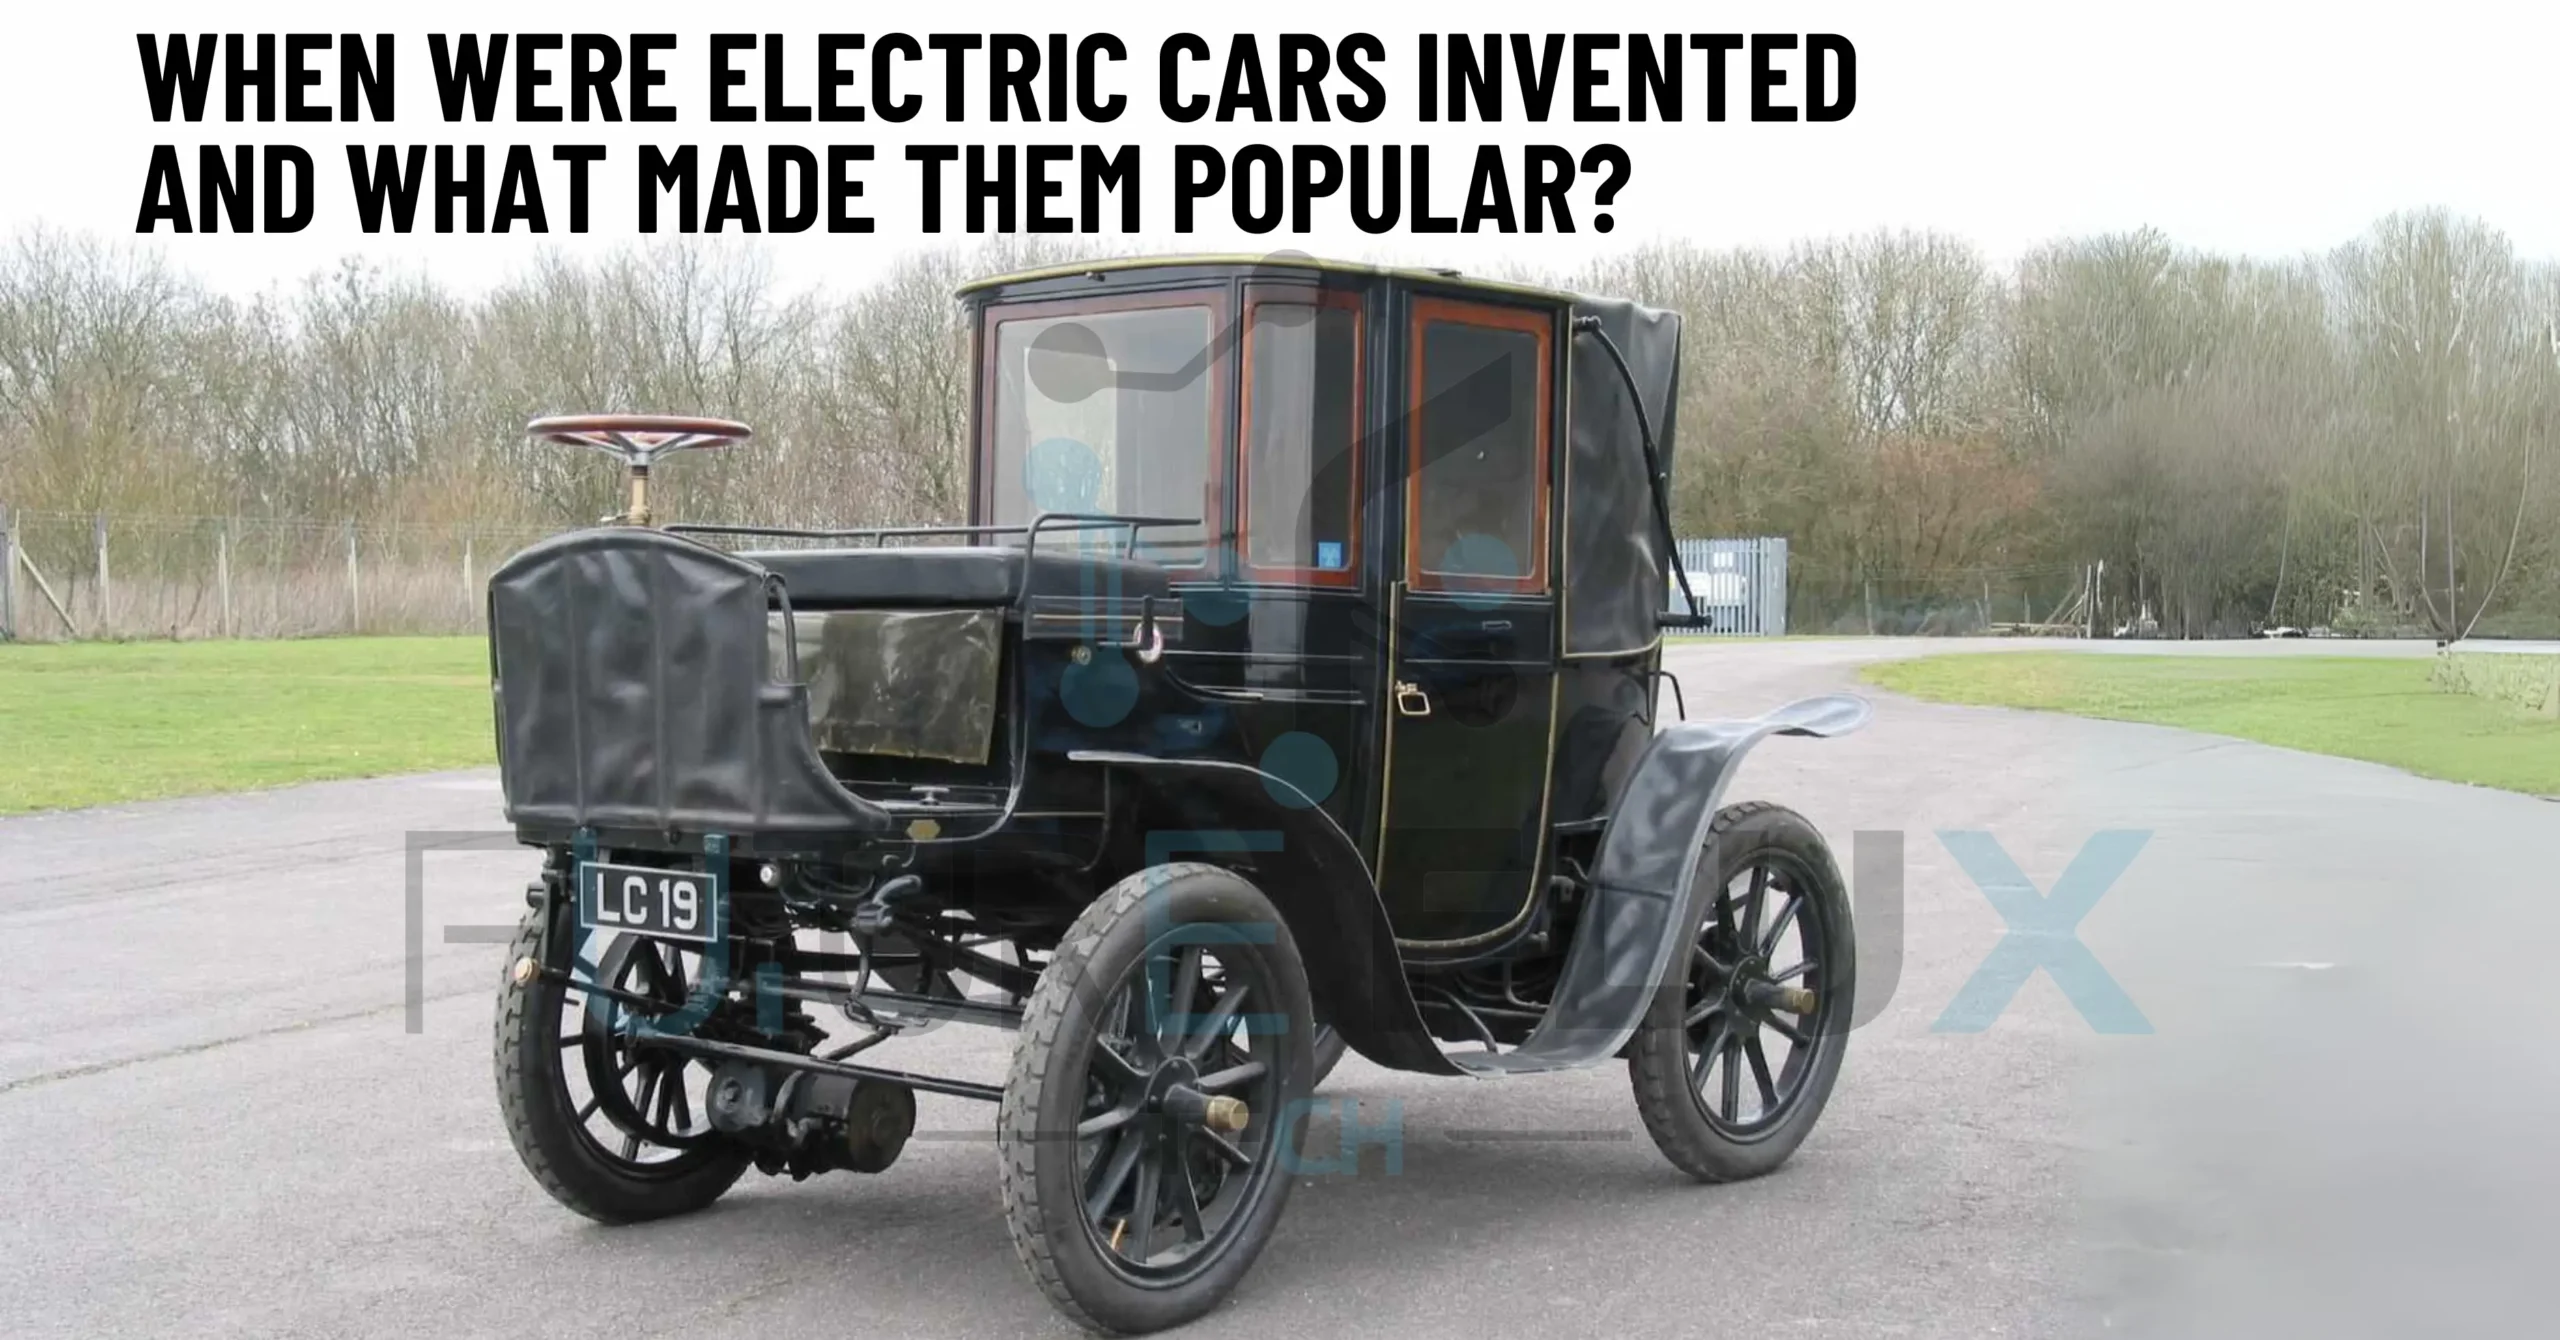 When were Electric Cars invented and What made them Popular?